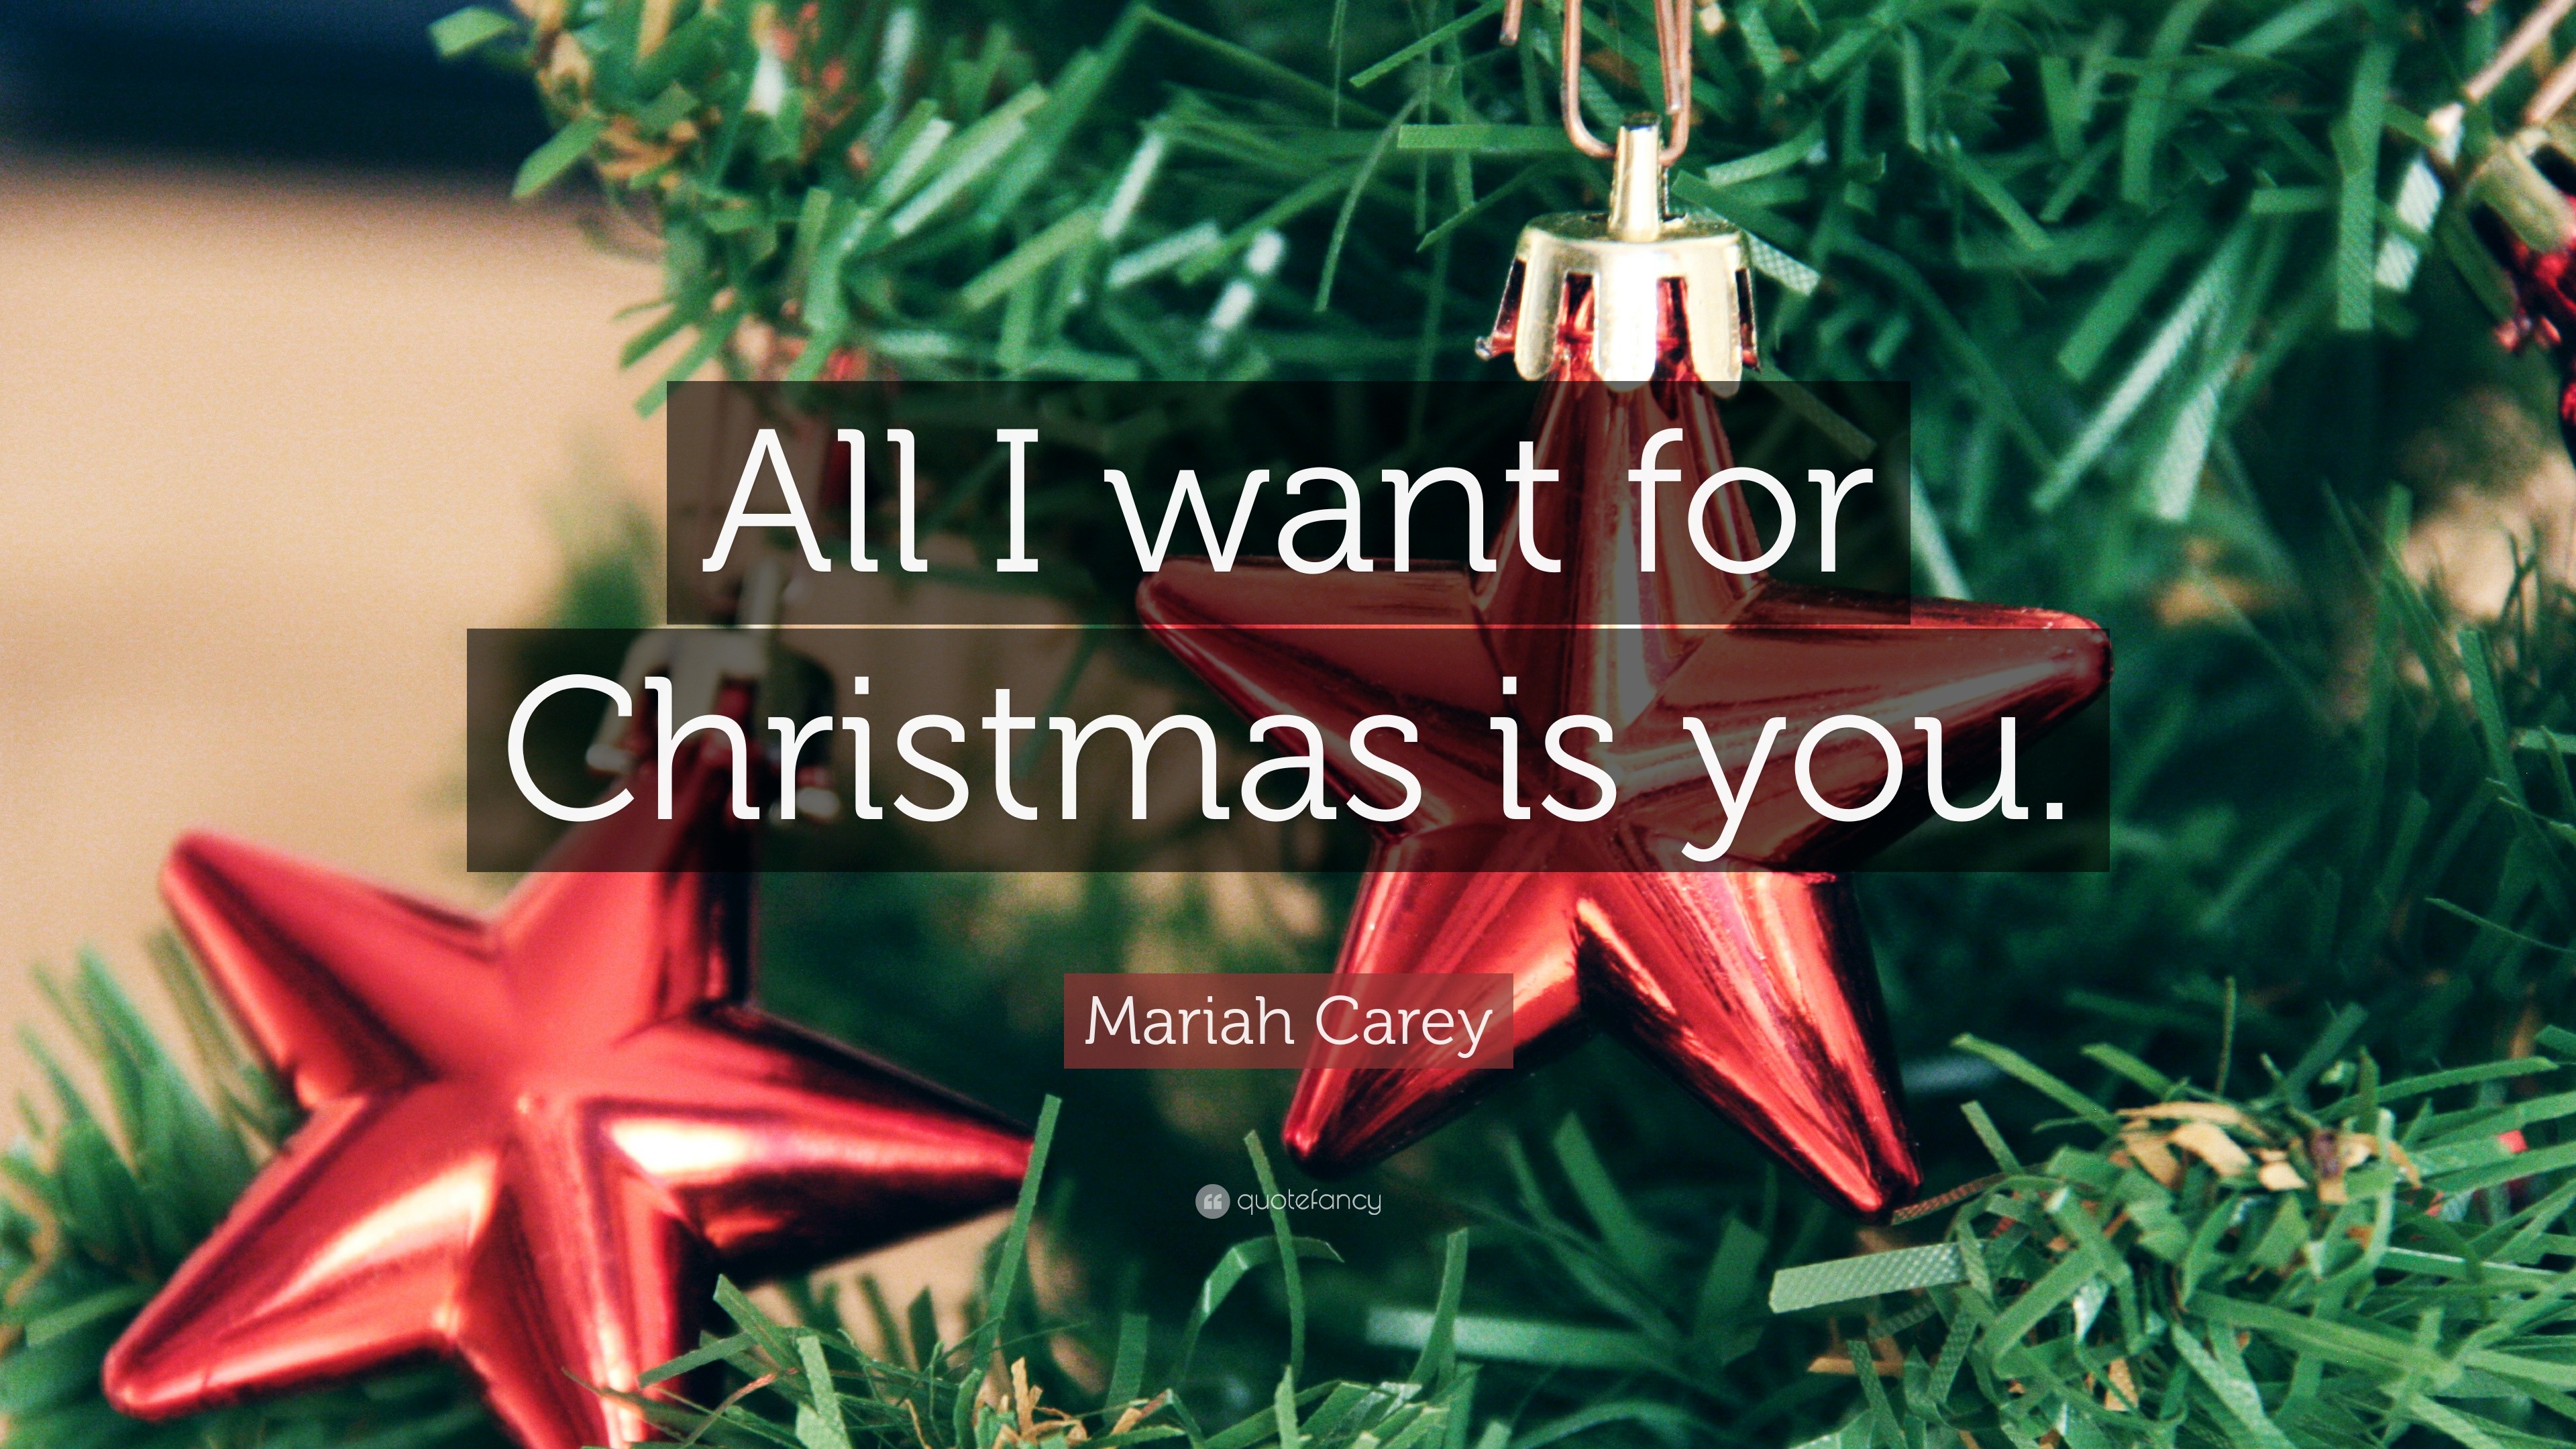 All I Want for Christmas is You!